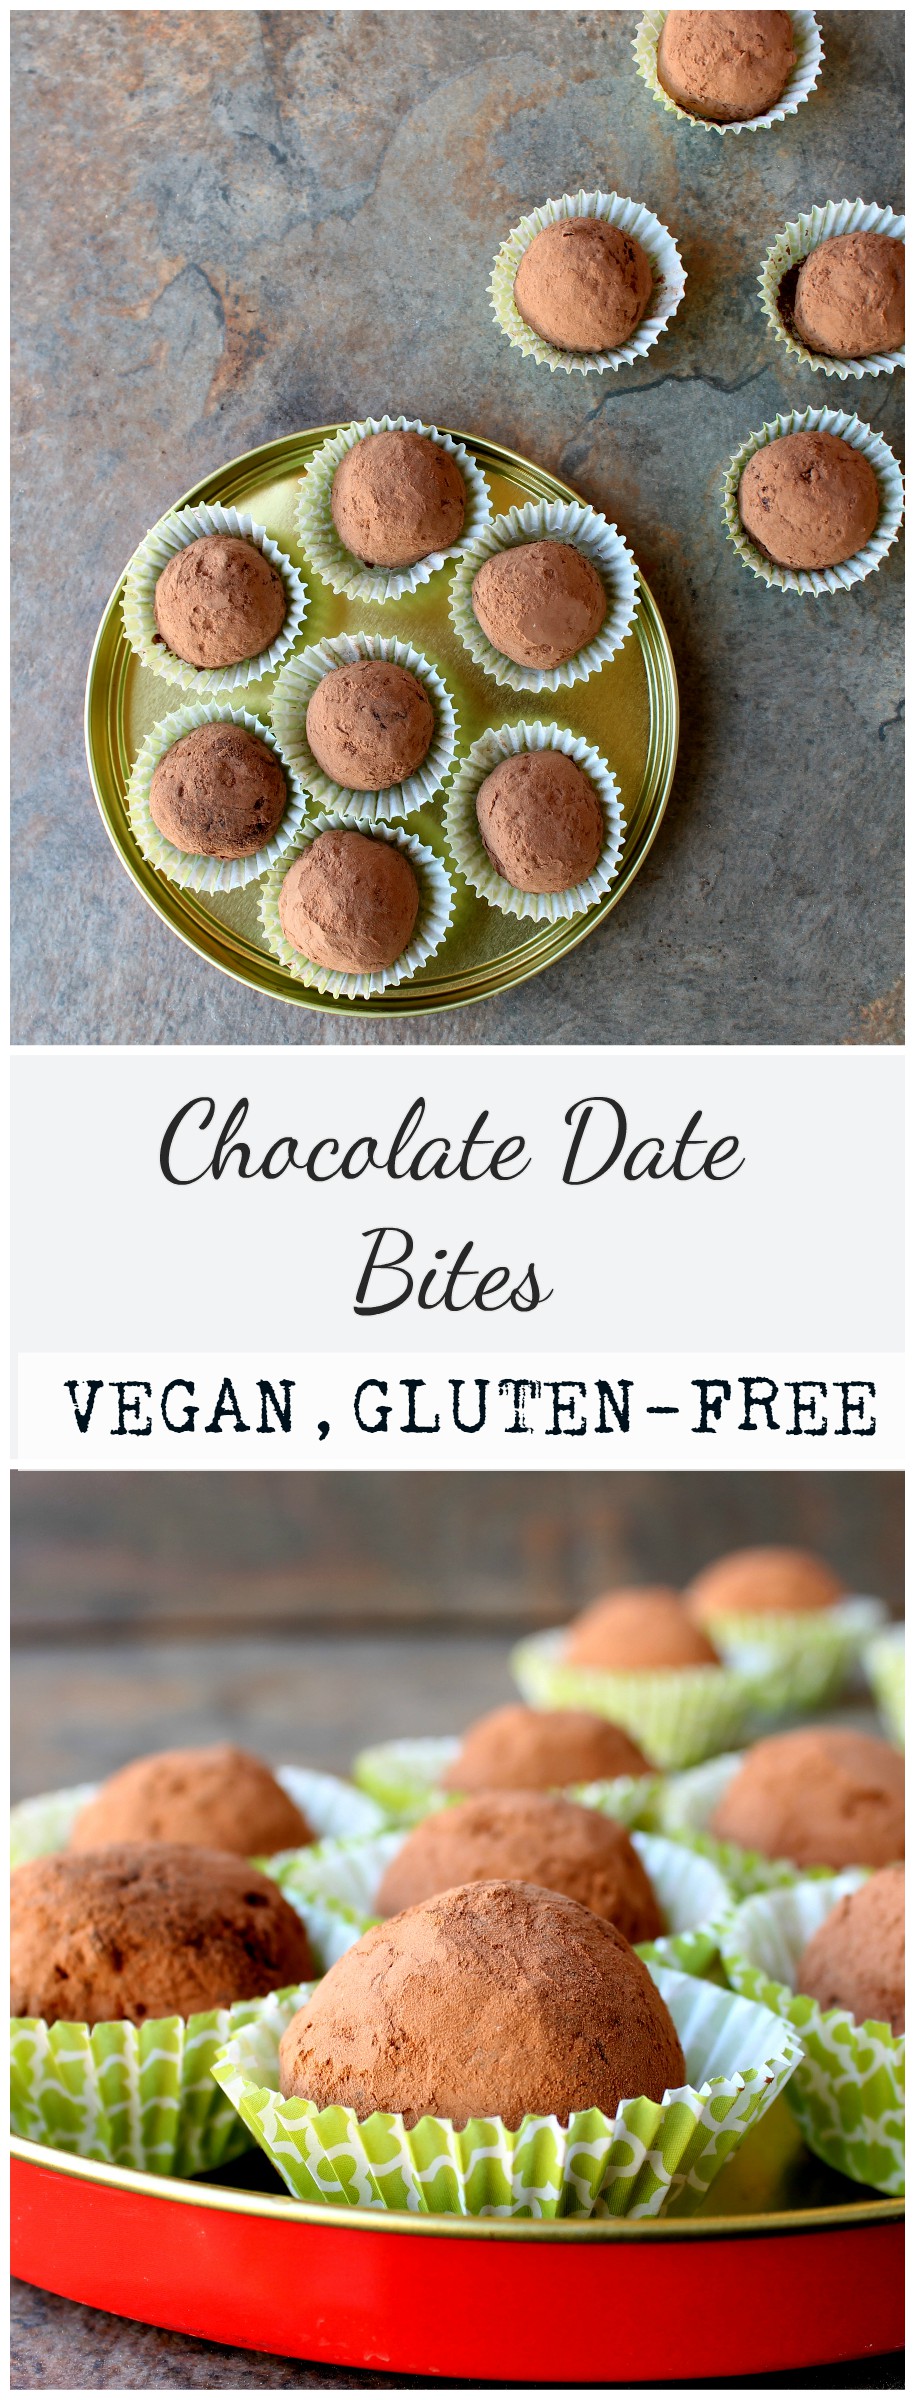 Chocolate Date Bites are naturally gluten-free, vegan snack that requires a bowl and 10 minutes of your time.